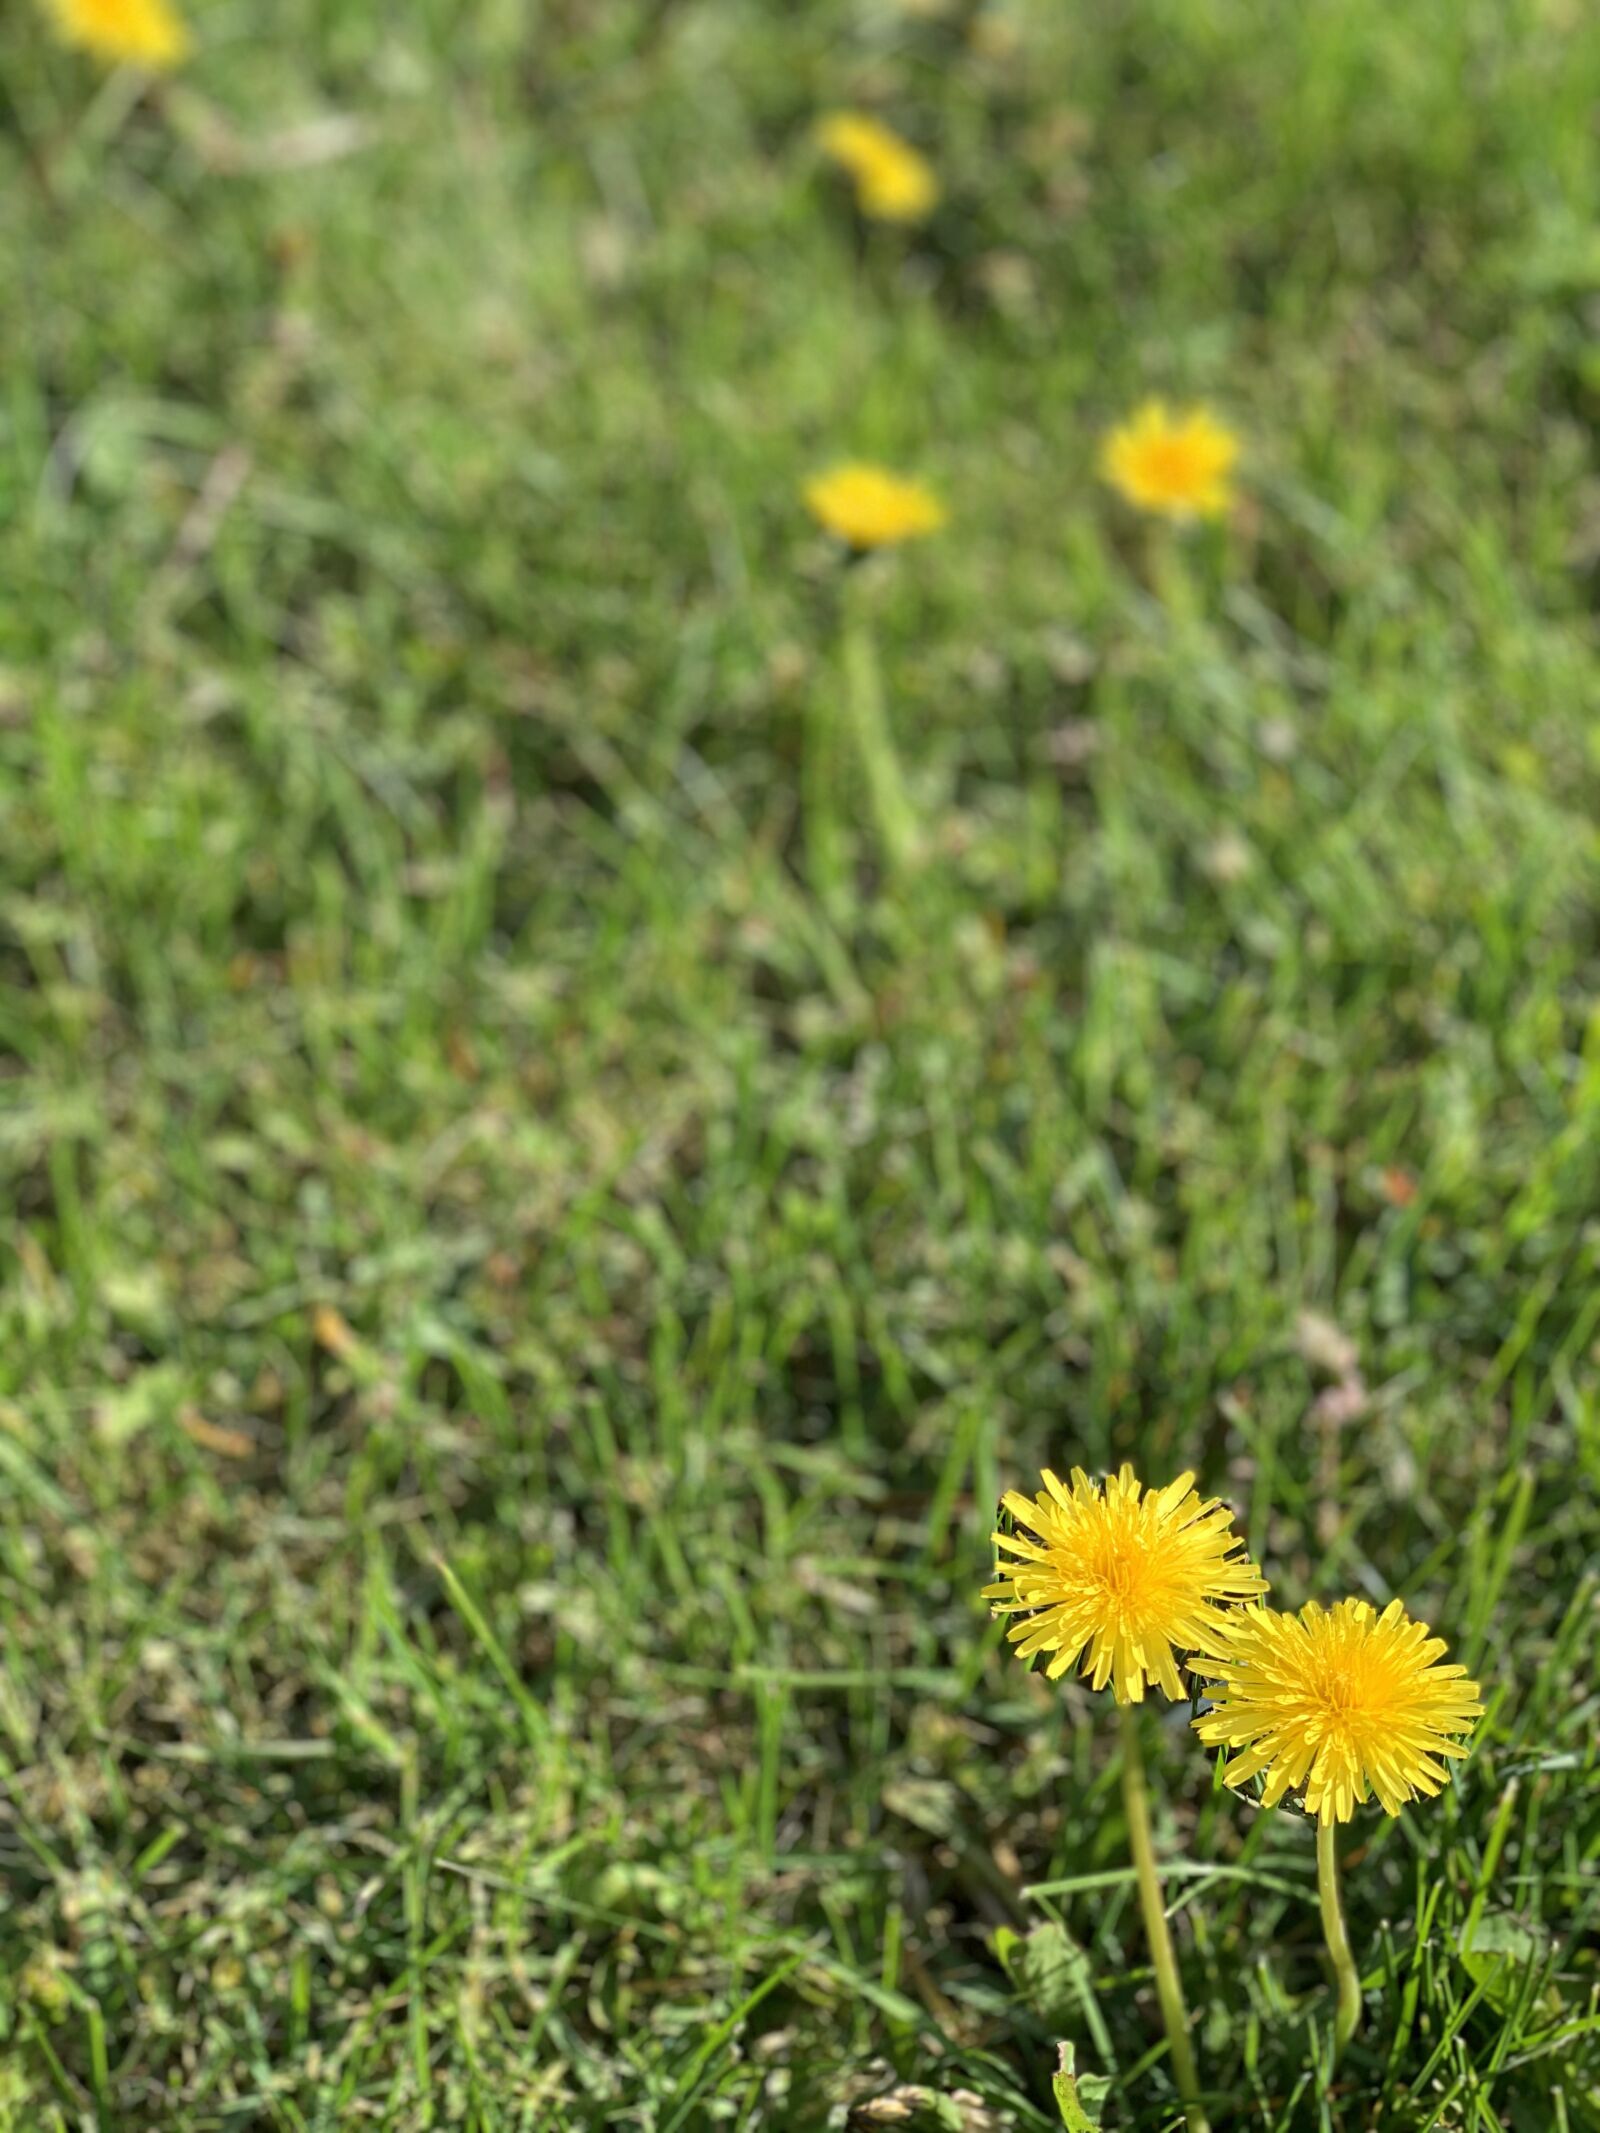 iPhone XS back dual camera 6mm f/2.4 sample photo. Flower, grass, nature photography